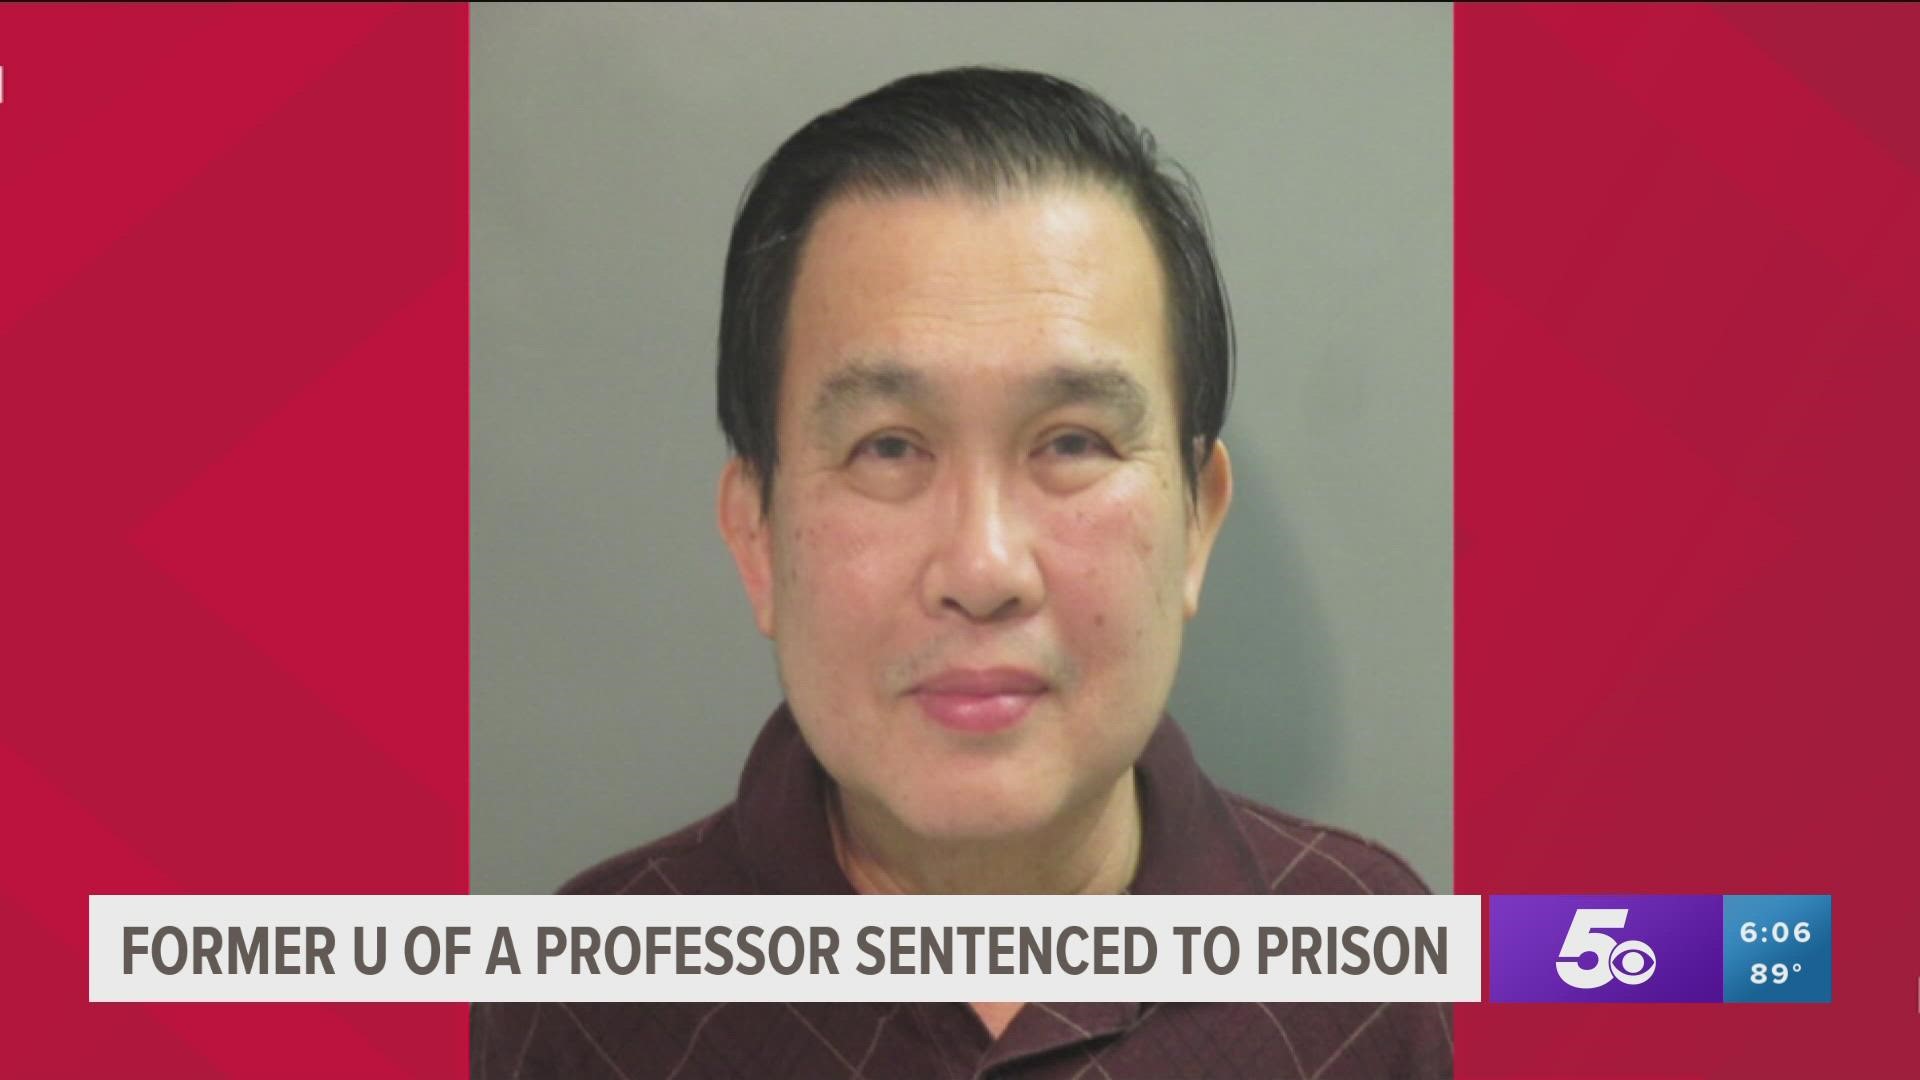 Former U of A professor Simon Saw-Teong Ang was sentenced to a year in federal prison after lying to an FBI agent about patents he held in China.